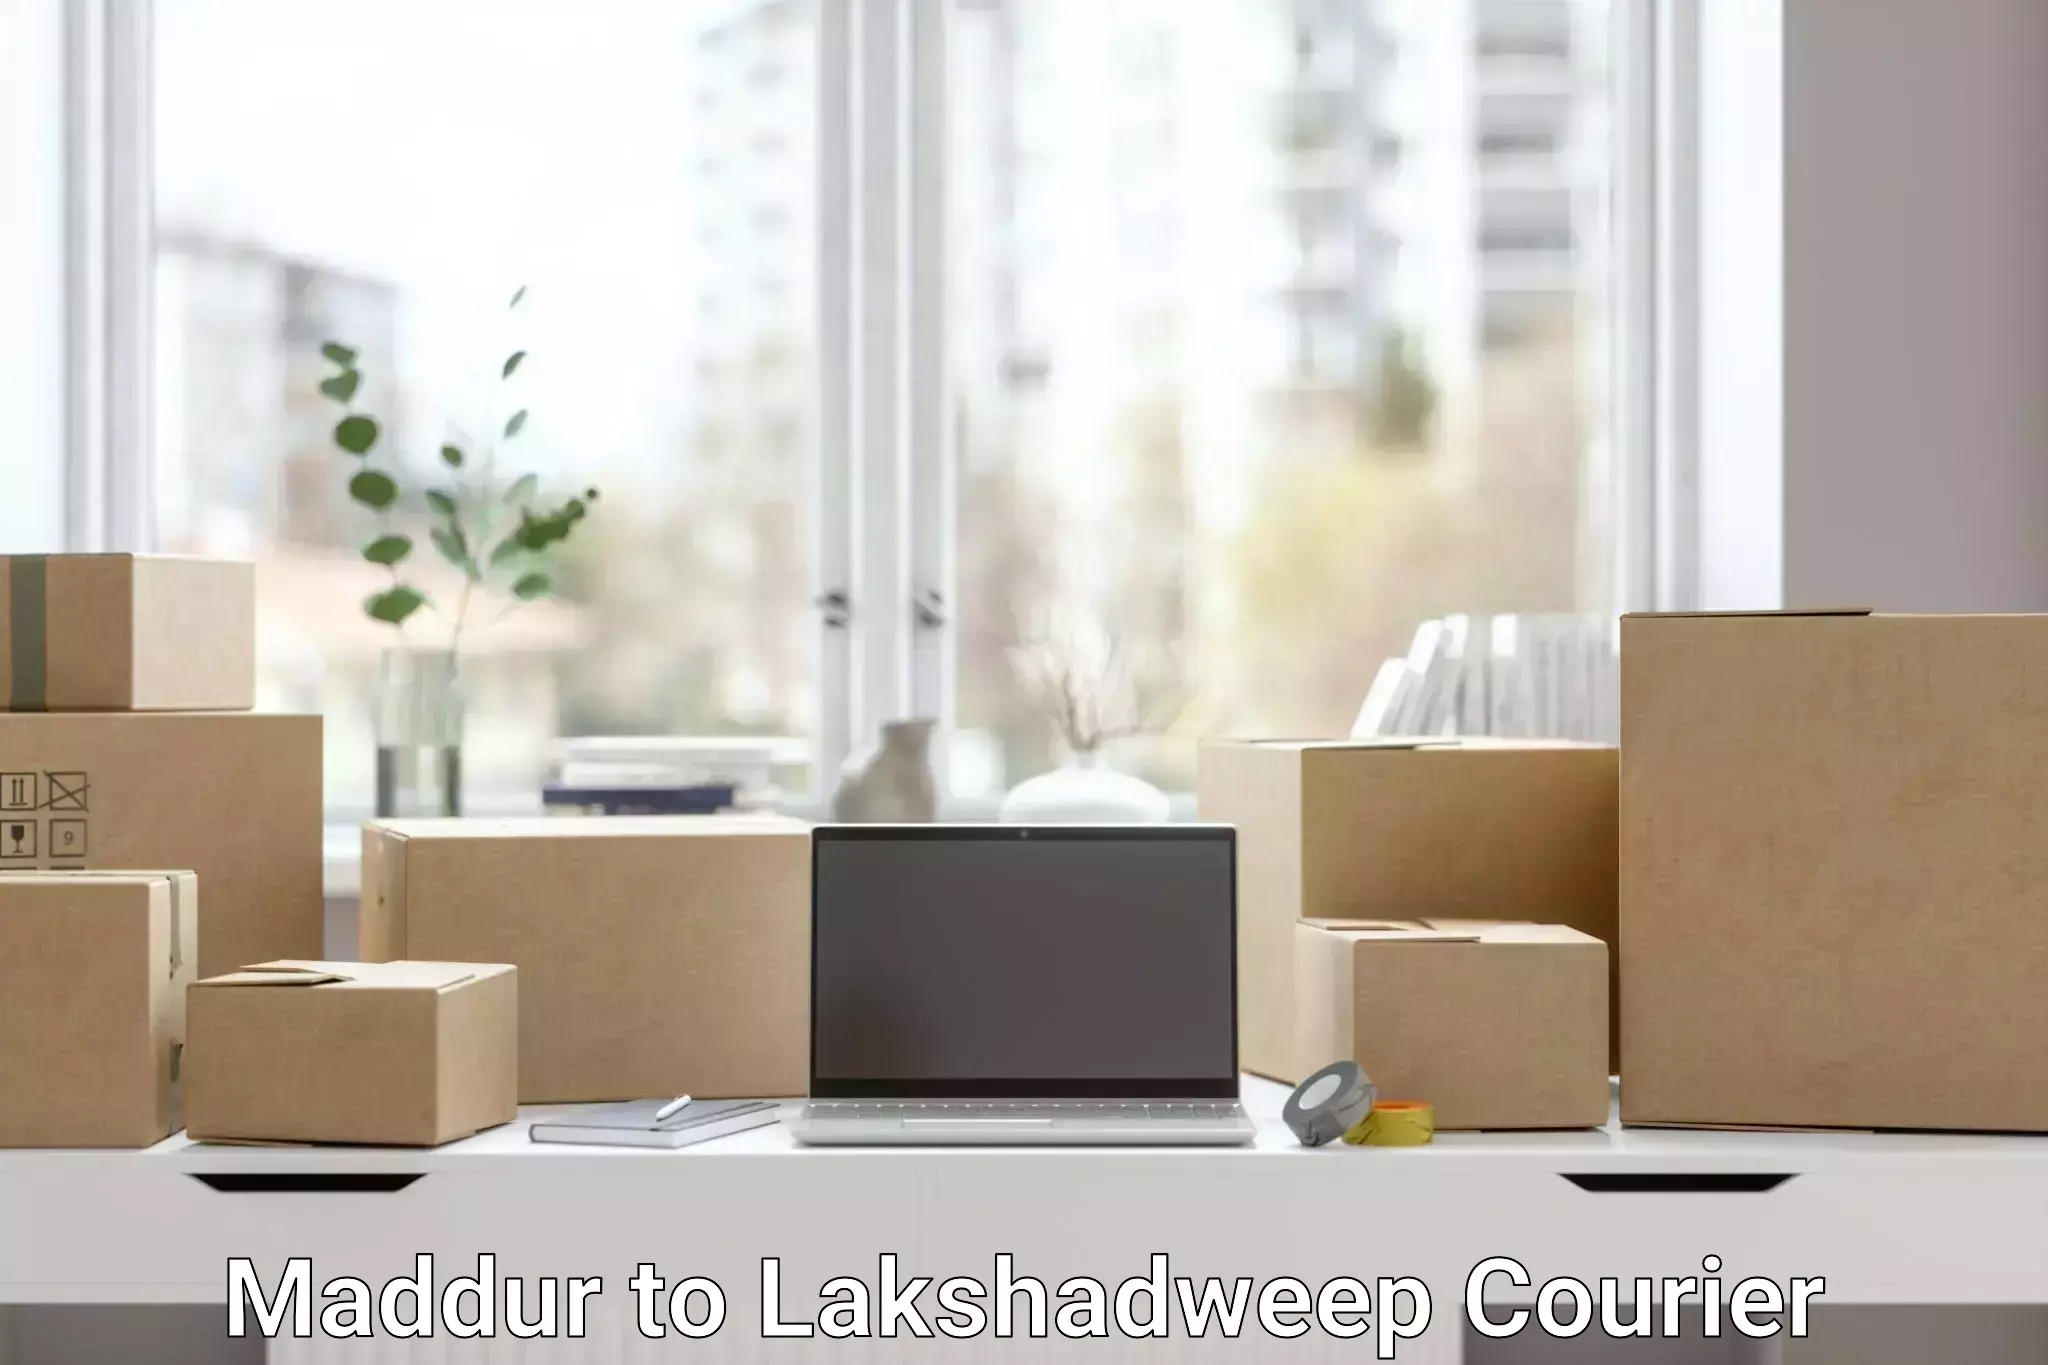 Weekend courier service Maddur to Lakshadweep